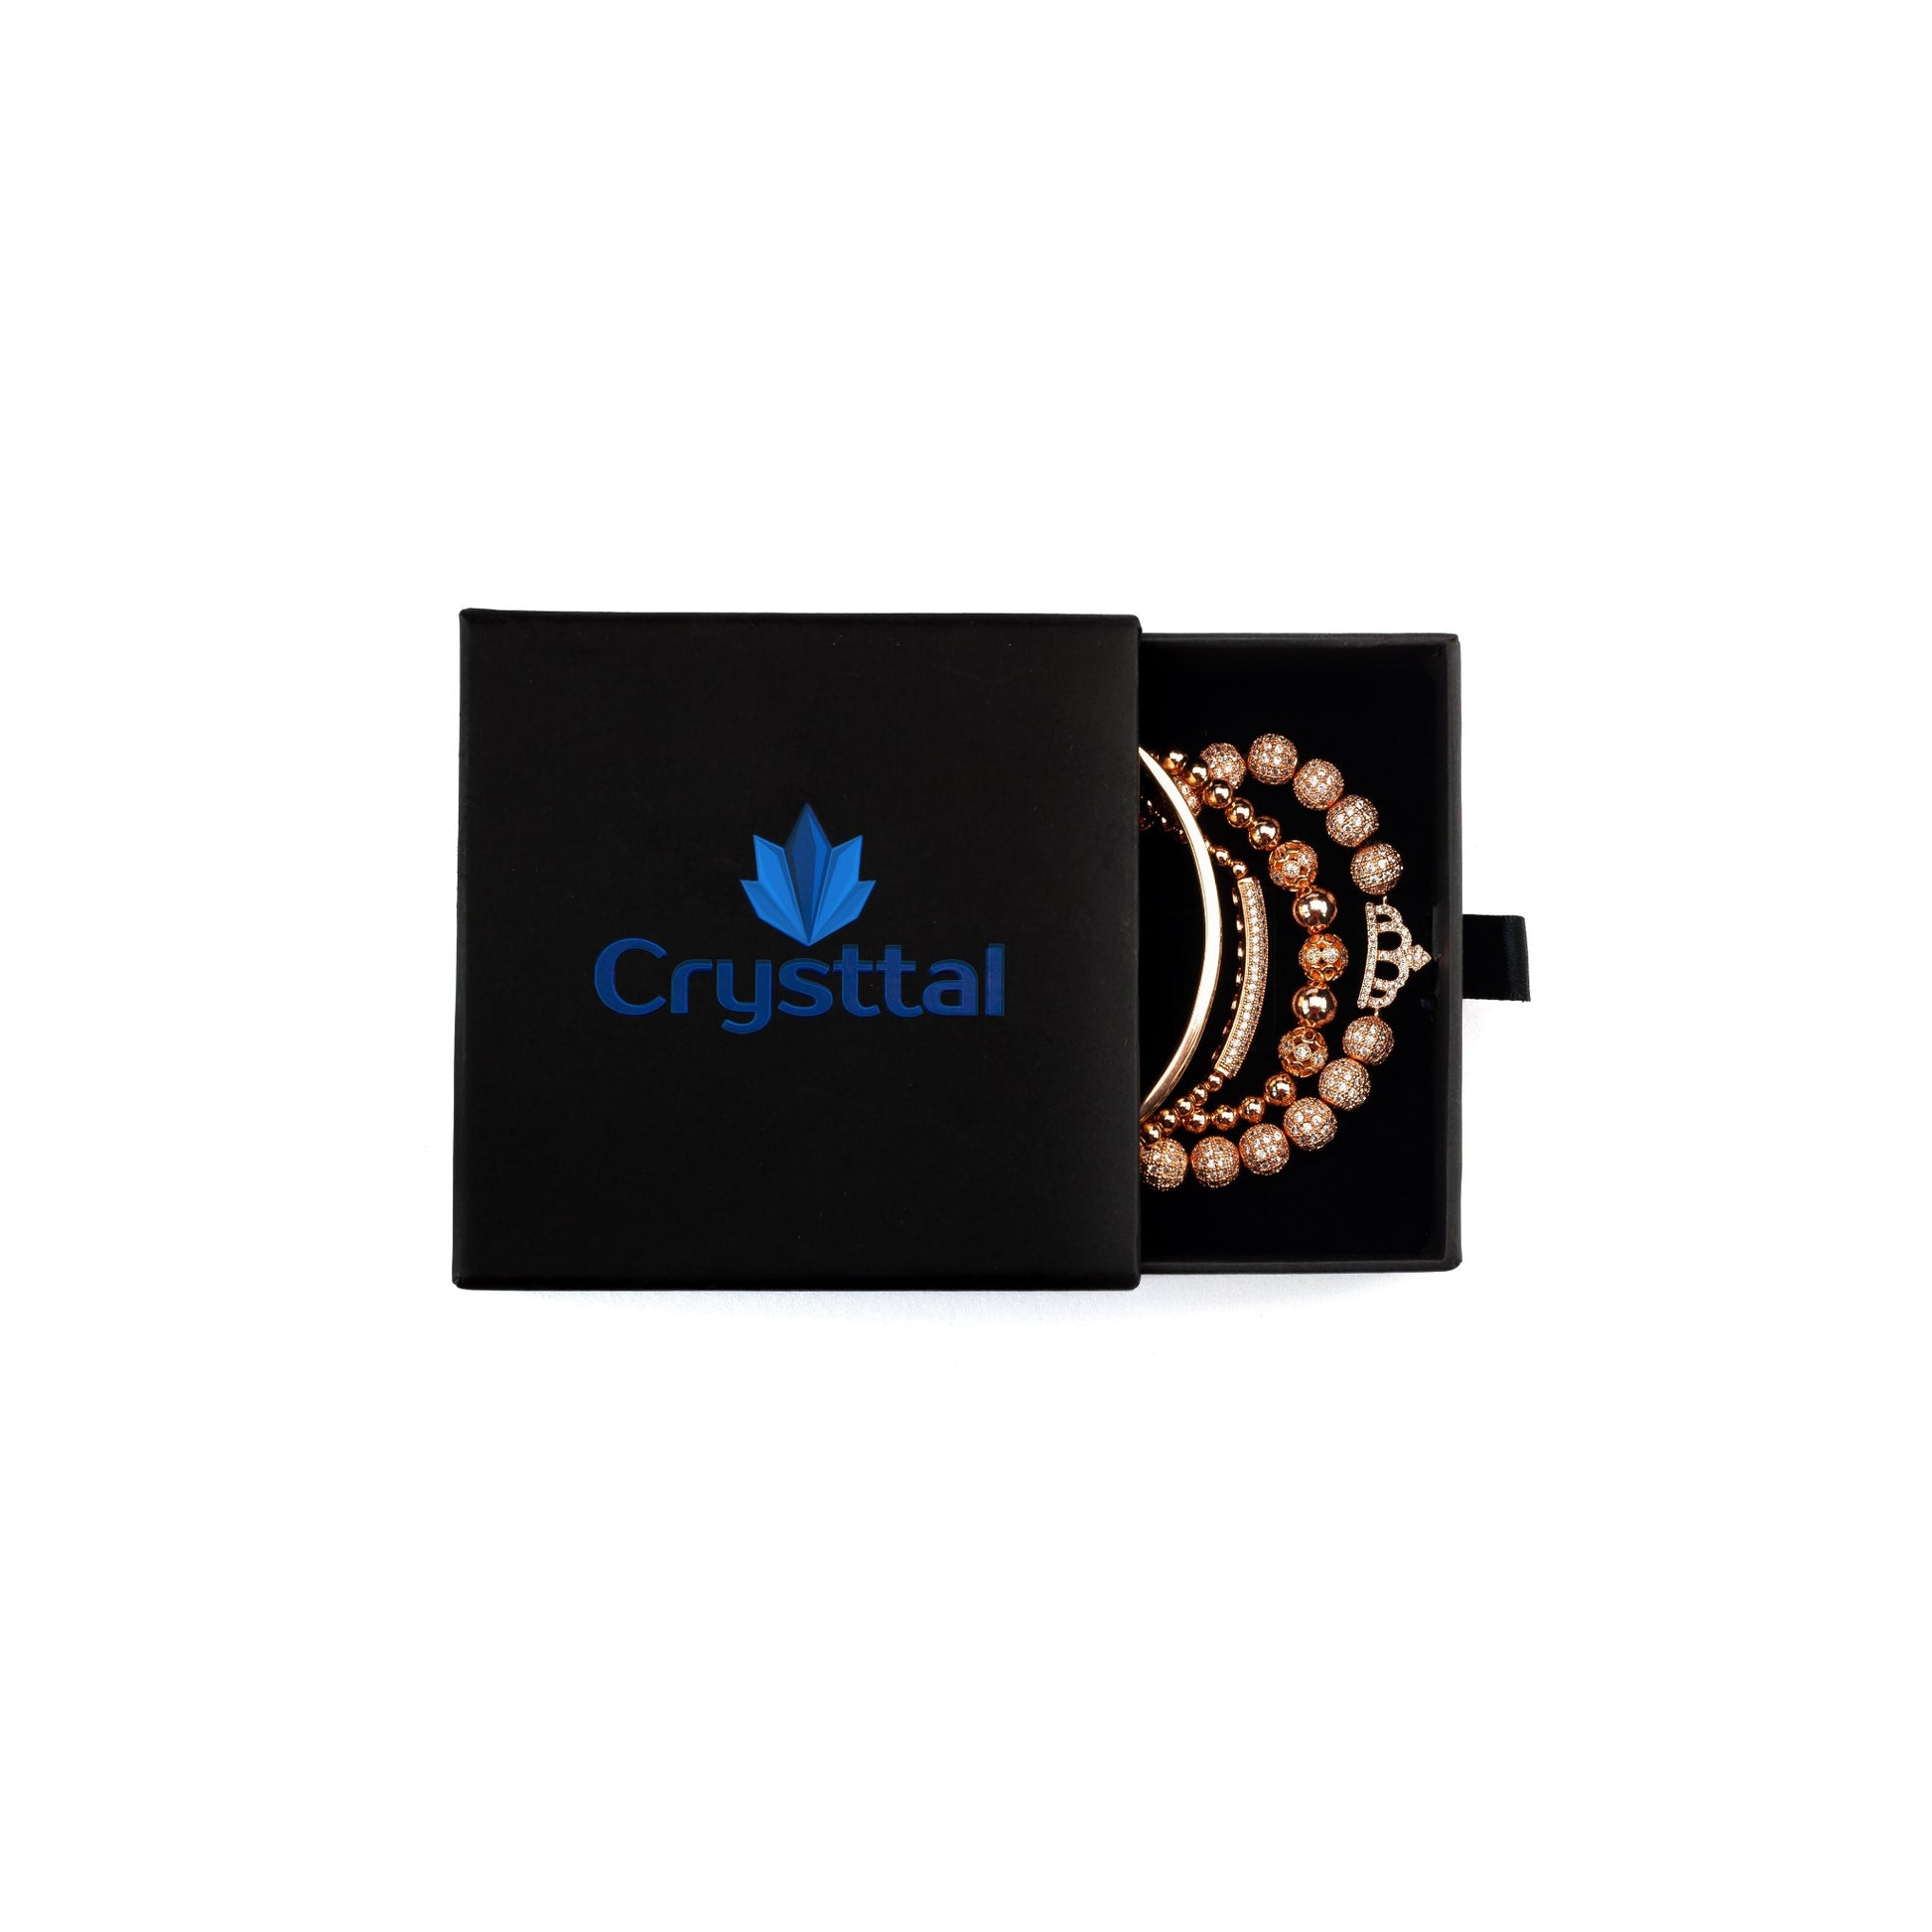 Imperial Roman Queen Bracelet Set in Rose Gold in Crysttal branded gift box